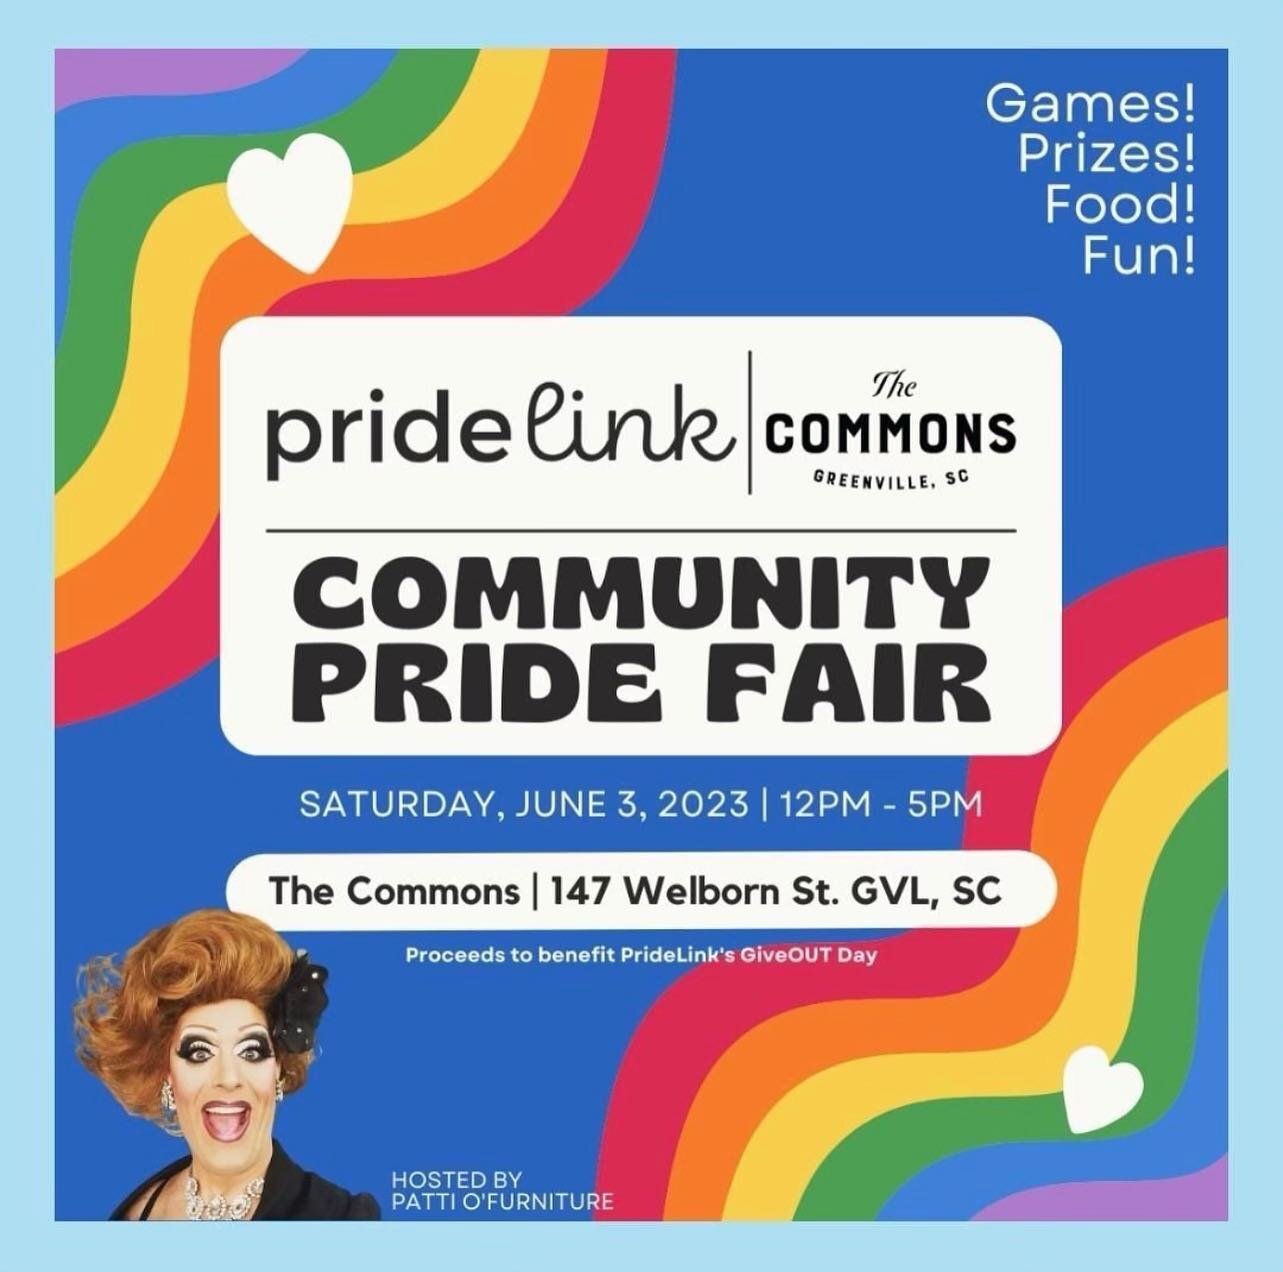 Want a fun way to celebrate the day after our concert? Come out and join us at the PrideLink Community Pride Fair on Saturday, June 3rd at The Commons and celebrate queer visibility and camaraderie! Enjoy games, prizes, food, and great entertainment 